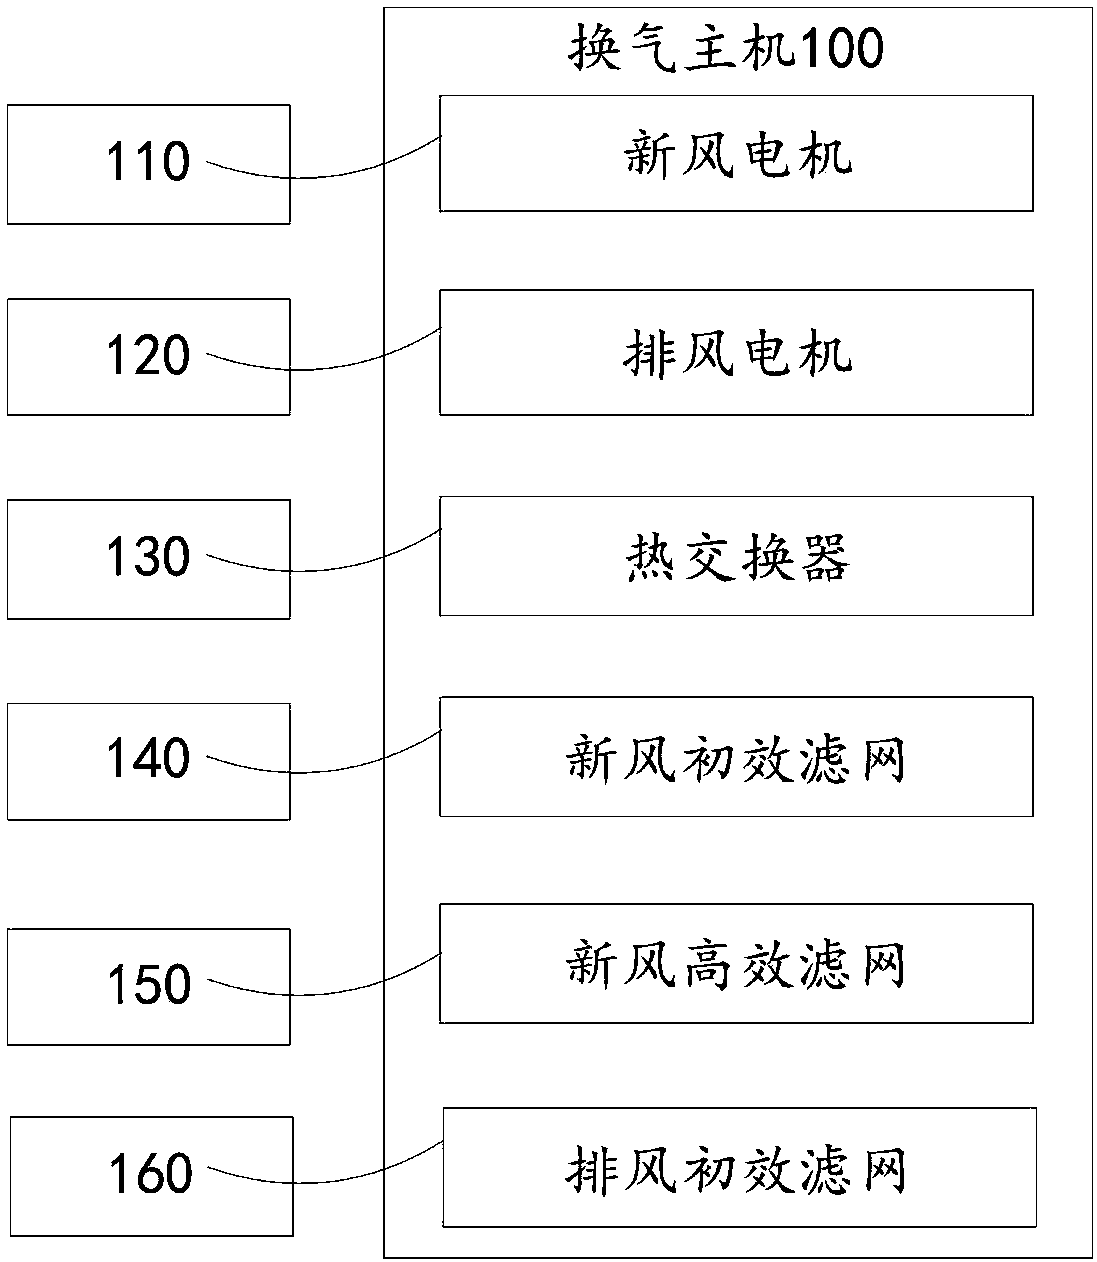 Suspended ceiling fresh air ventilator energy-conservation control system and energy-conservation control method thereof